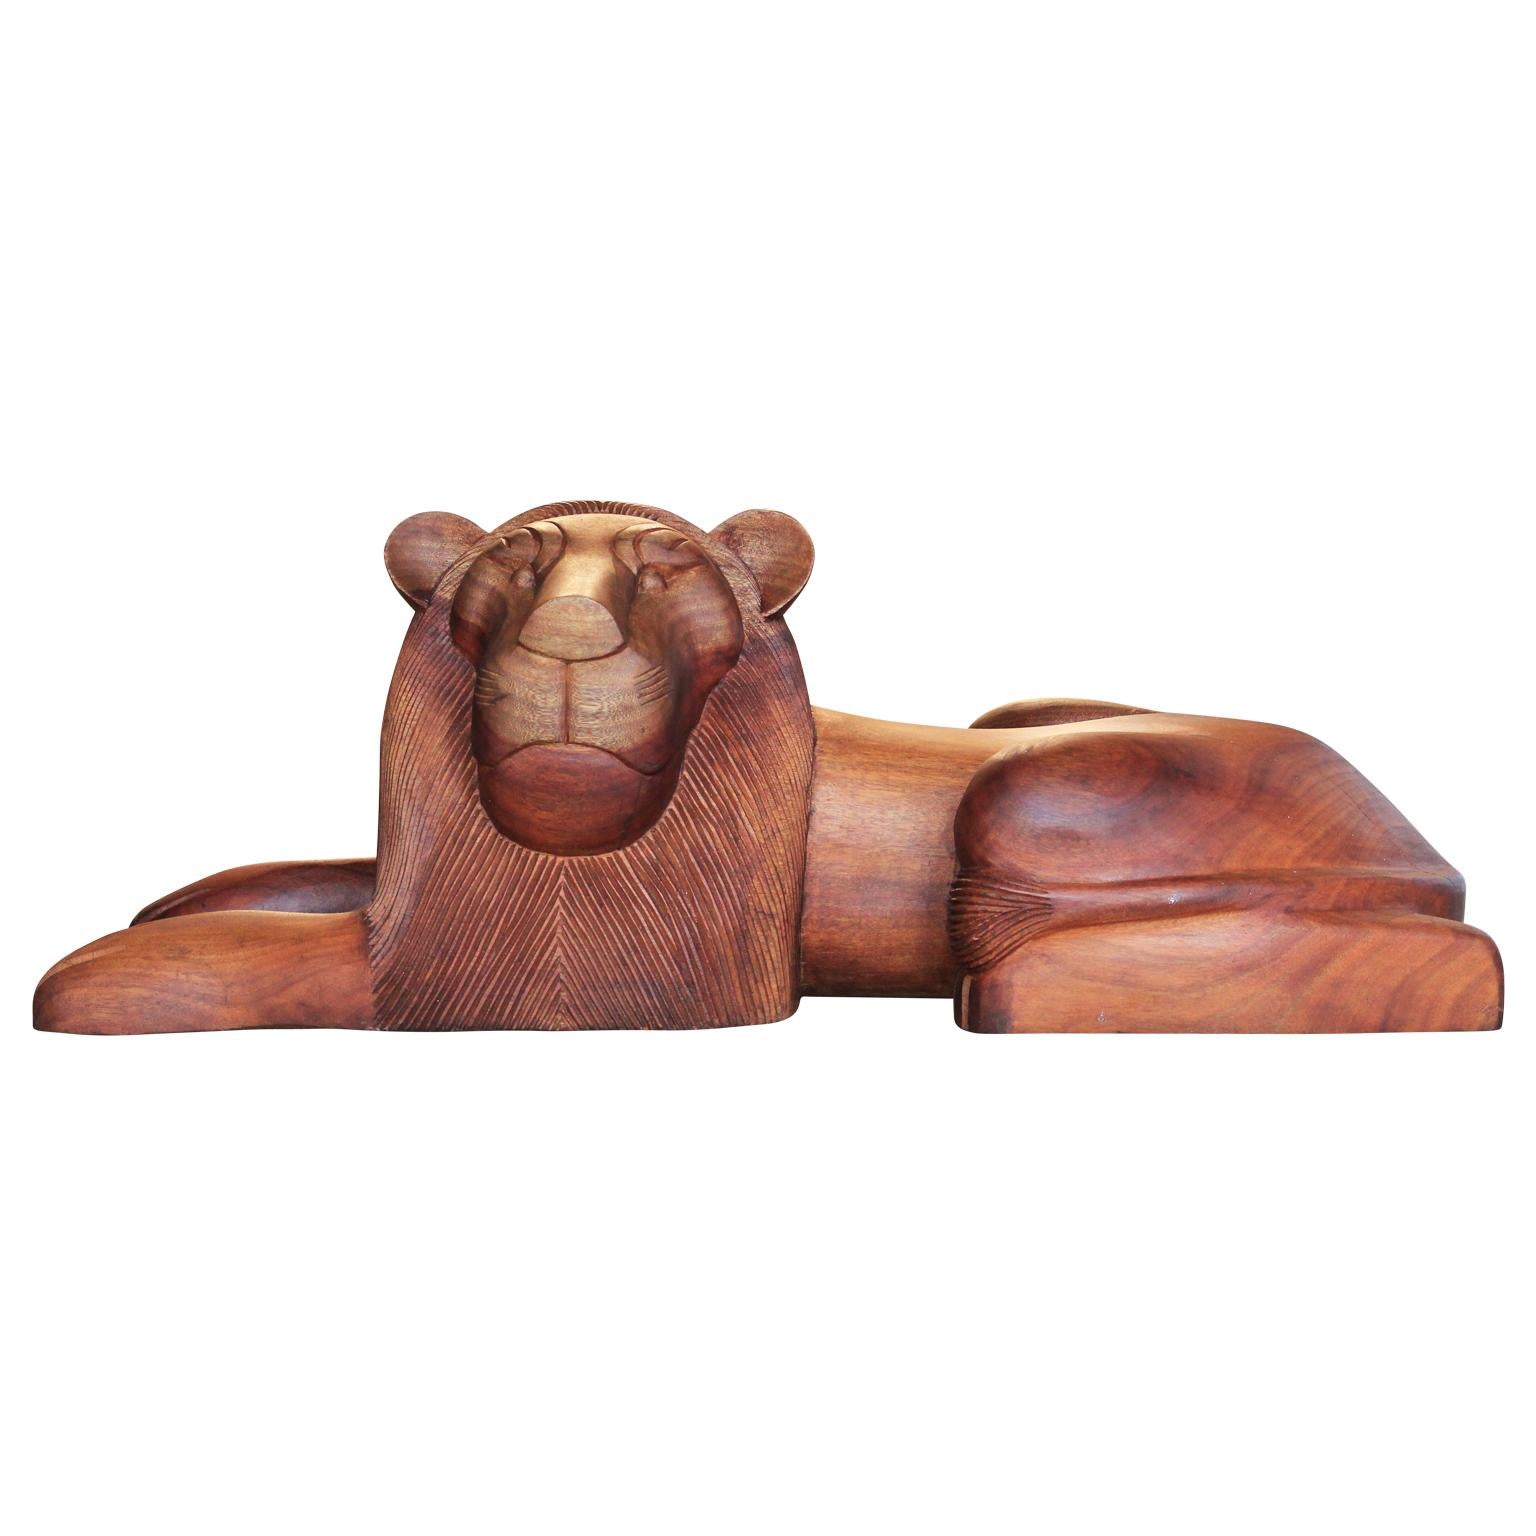 Pair of Stylized Mid Century Modern Carved Solid Teak Wood Lion Sculptures - Brown Abstract Sculpture by Sergio Bustamante